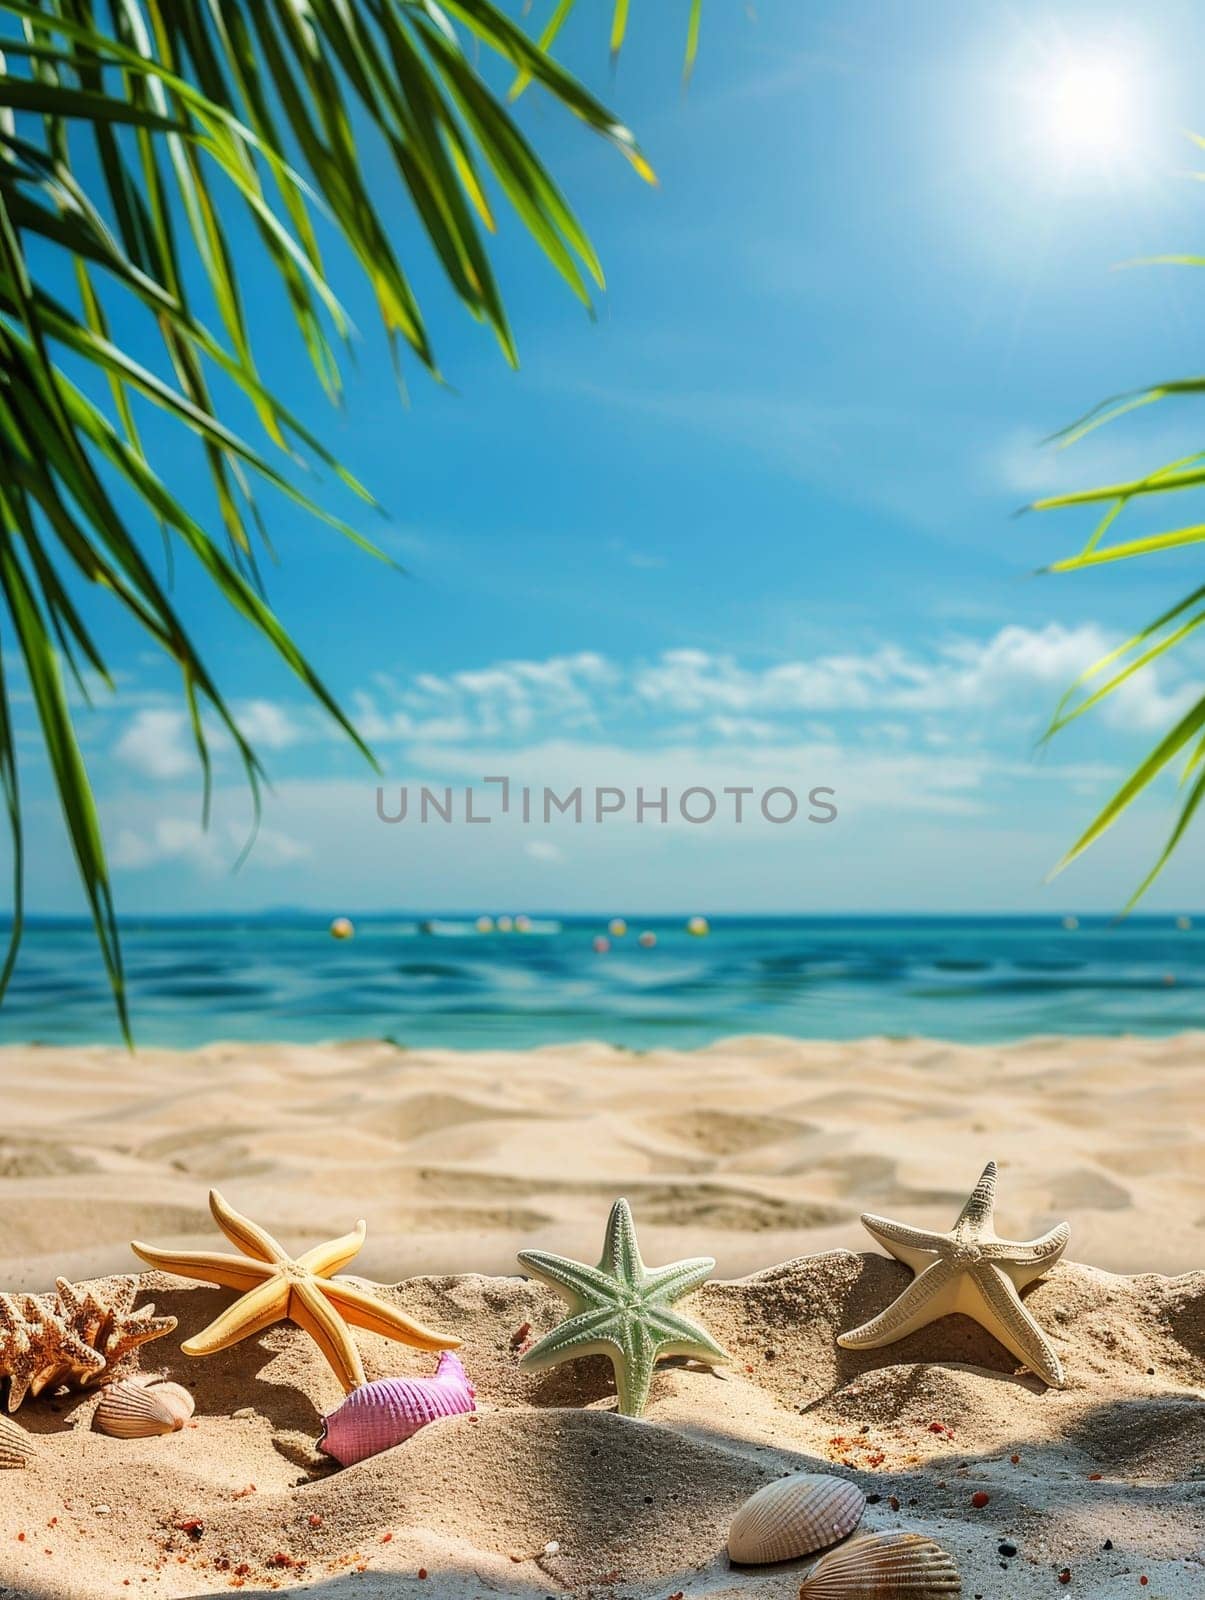 A collection of starfish and shells lies scattered on sunlit sand, framed by tropical palm fronds against a clear blue sky. It's a picturesque moment of coastal beauty and marine discovery by sfinks